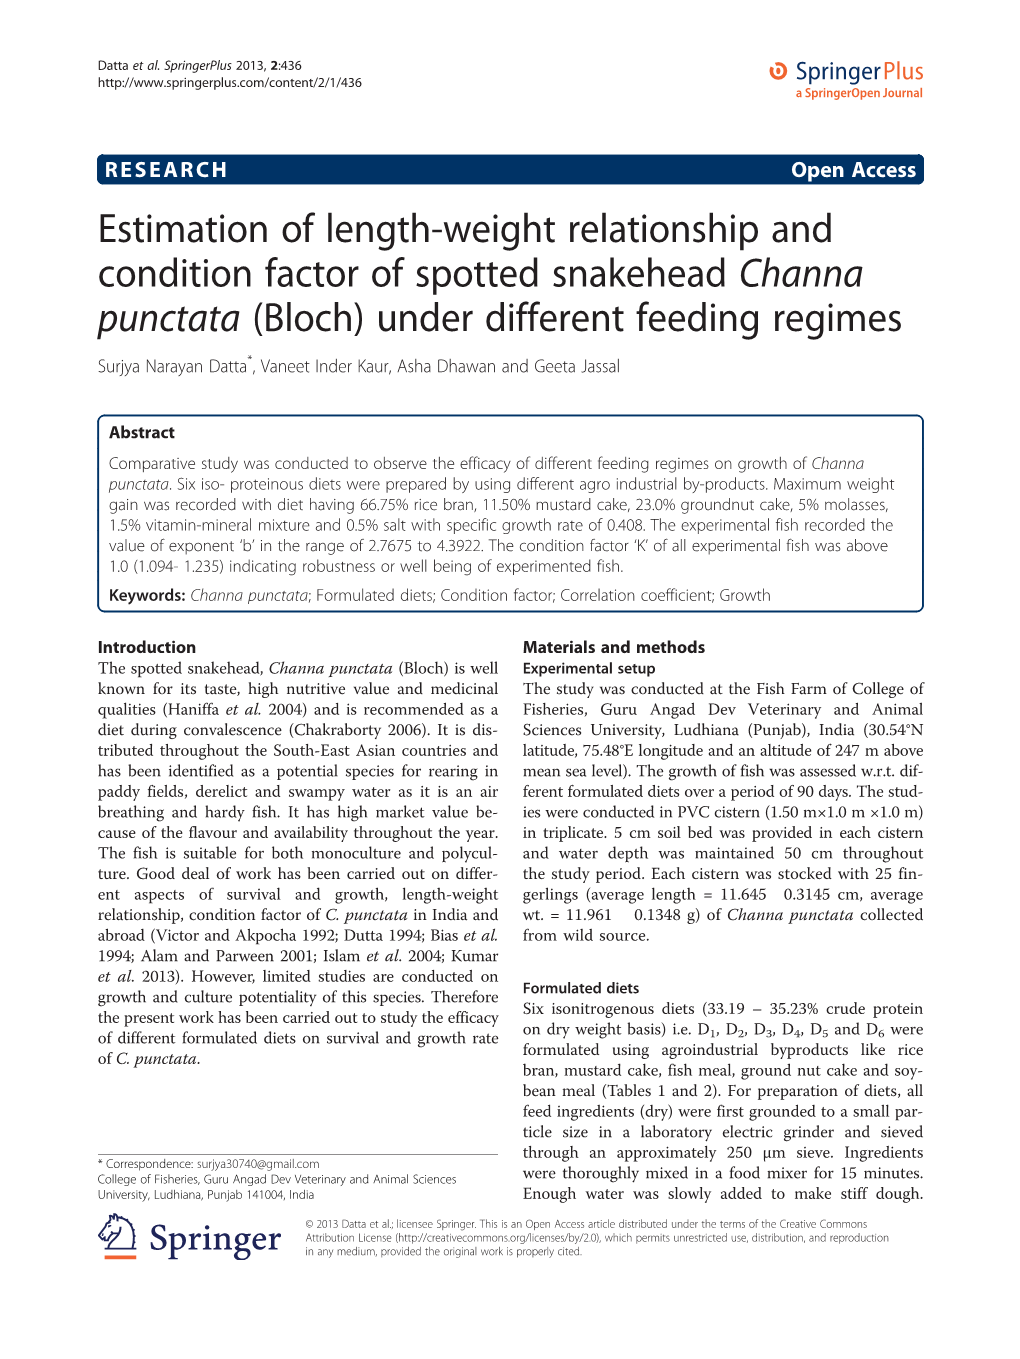 Estimation of Length-Weight Relationship and Condition Factor Of